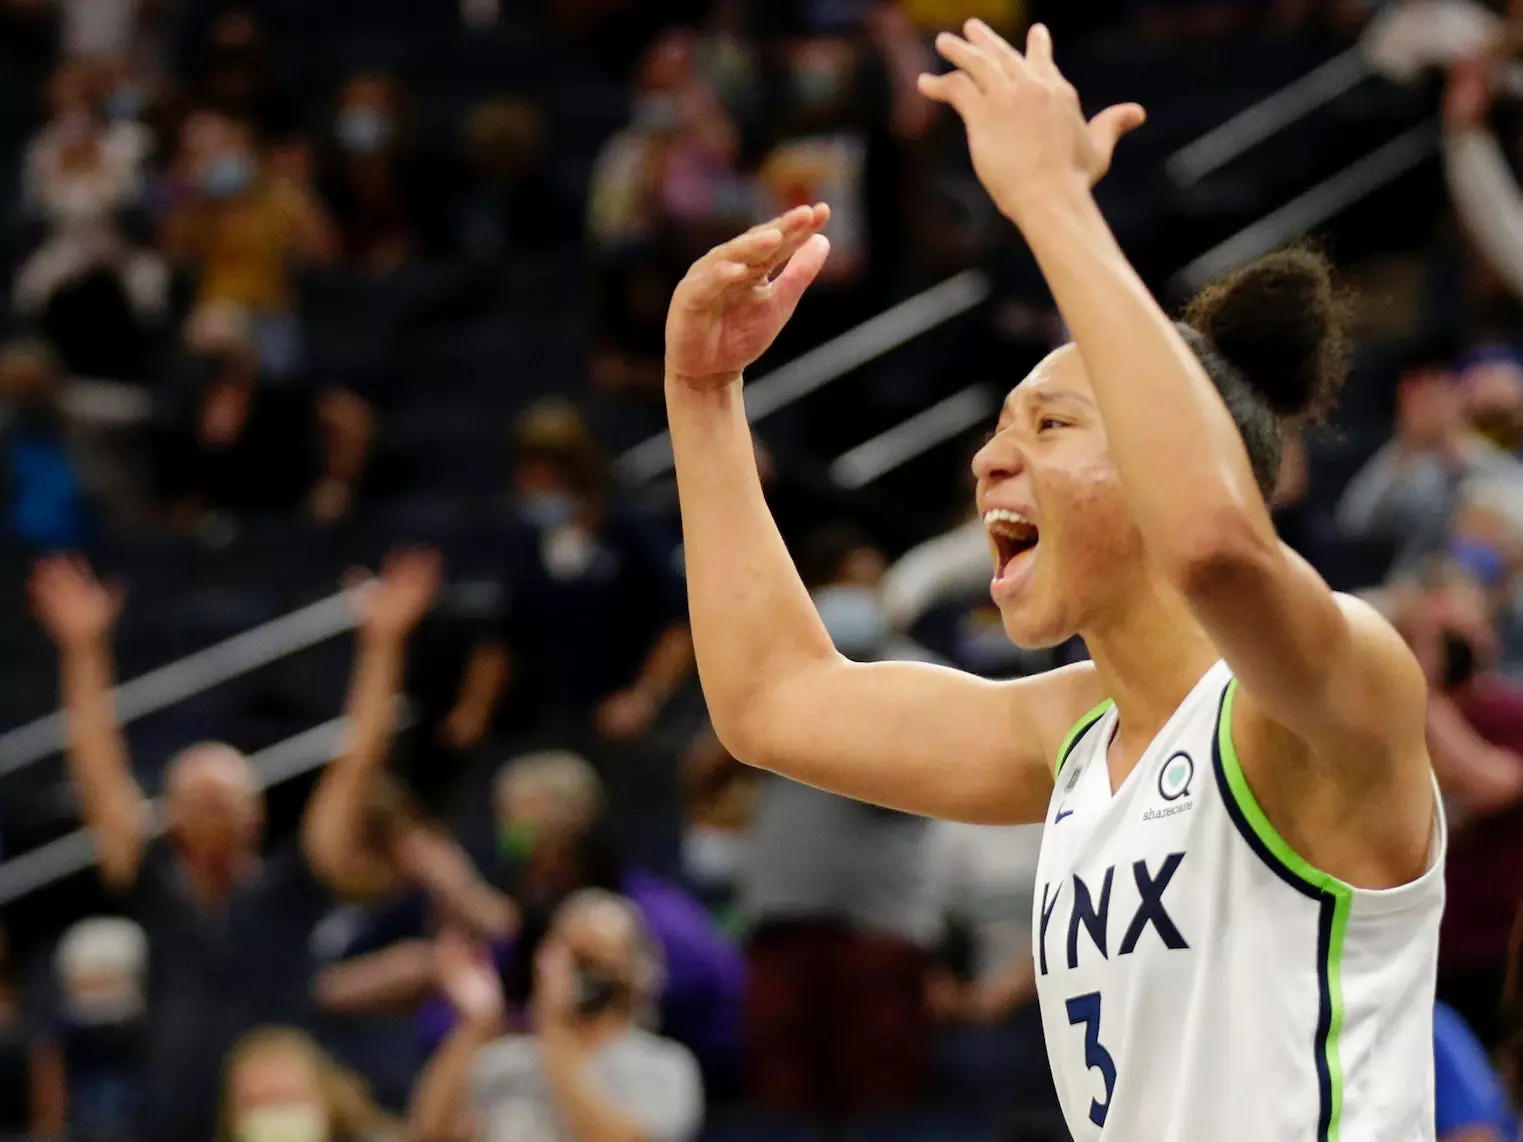 A WNBA star went viral for schooling men who 'don't respect women's basketball' in off-season pickup games